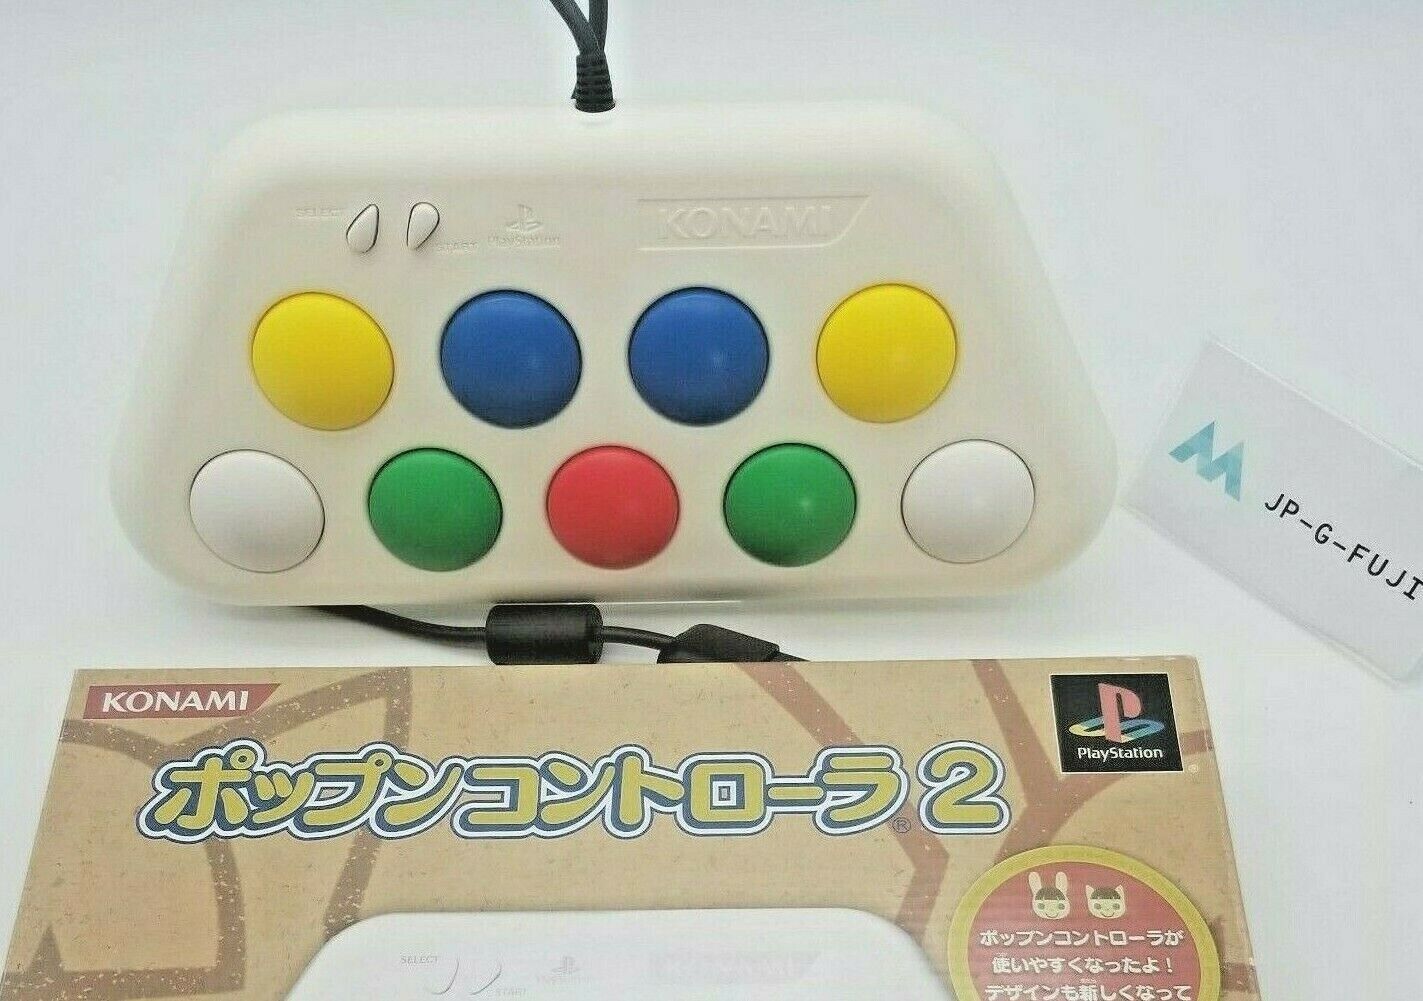 Pop'n Music Controller Ver 2 Japan Japanese PlayStation 2 1 PS1 PS2